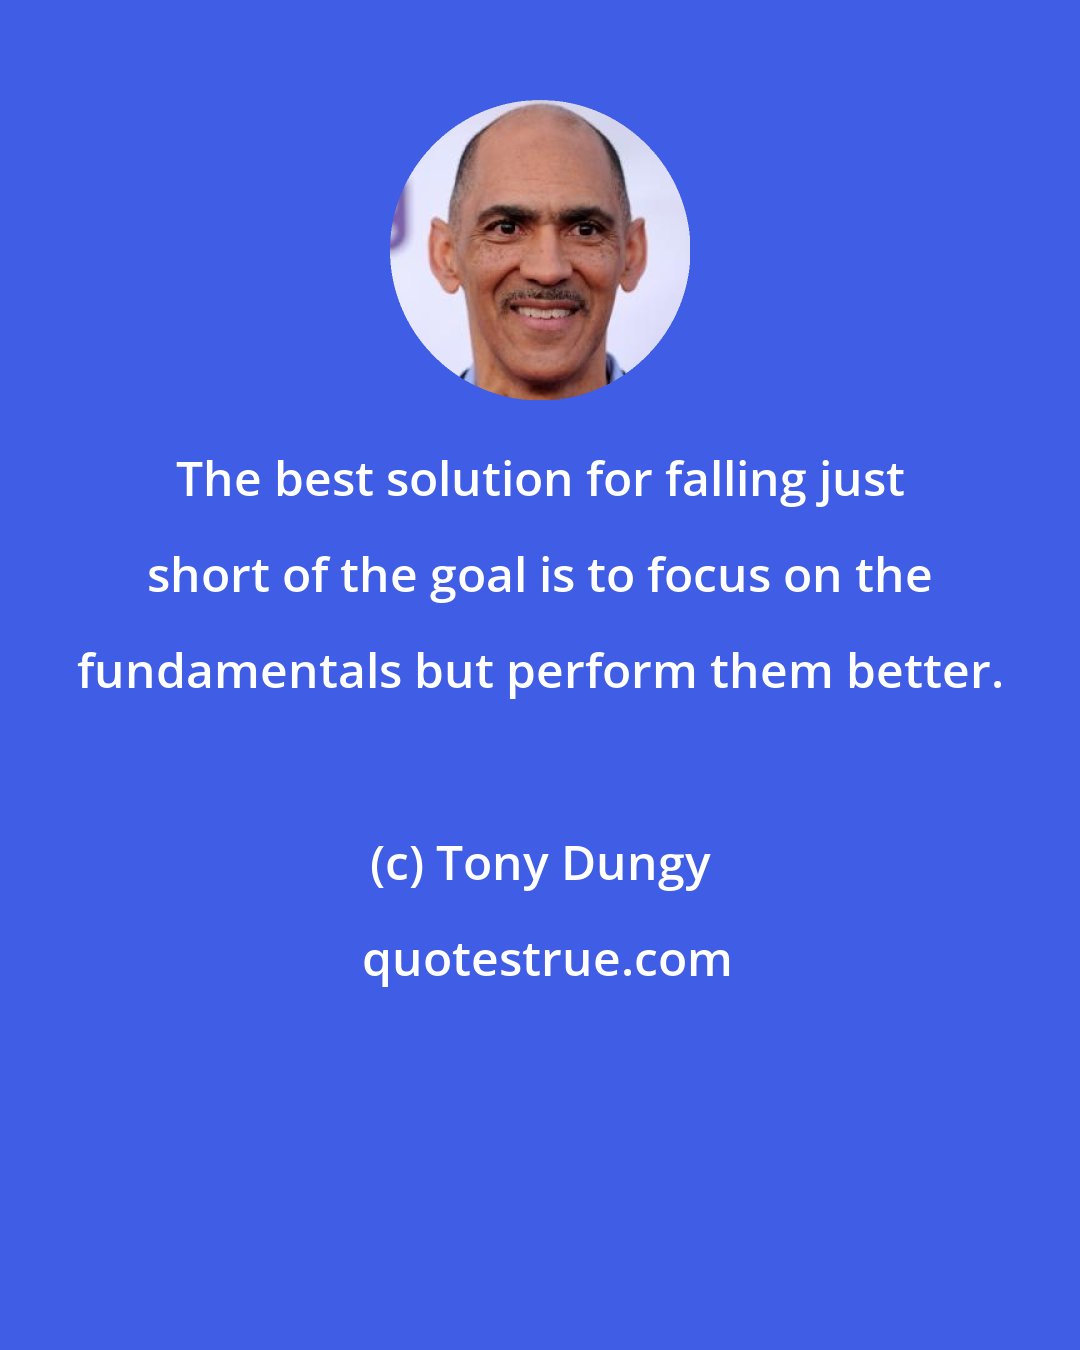 Tony Dungy: The best solution for falling just short of the goal is to focus on the fundamentals but perform them better.